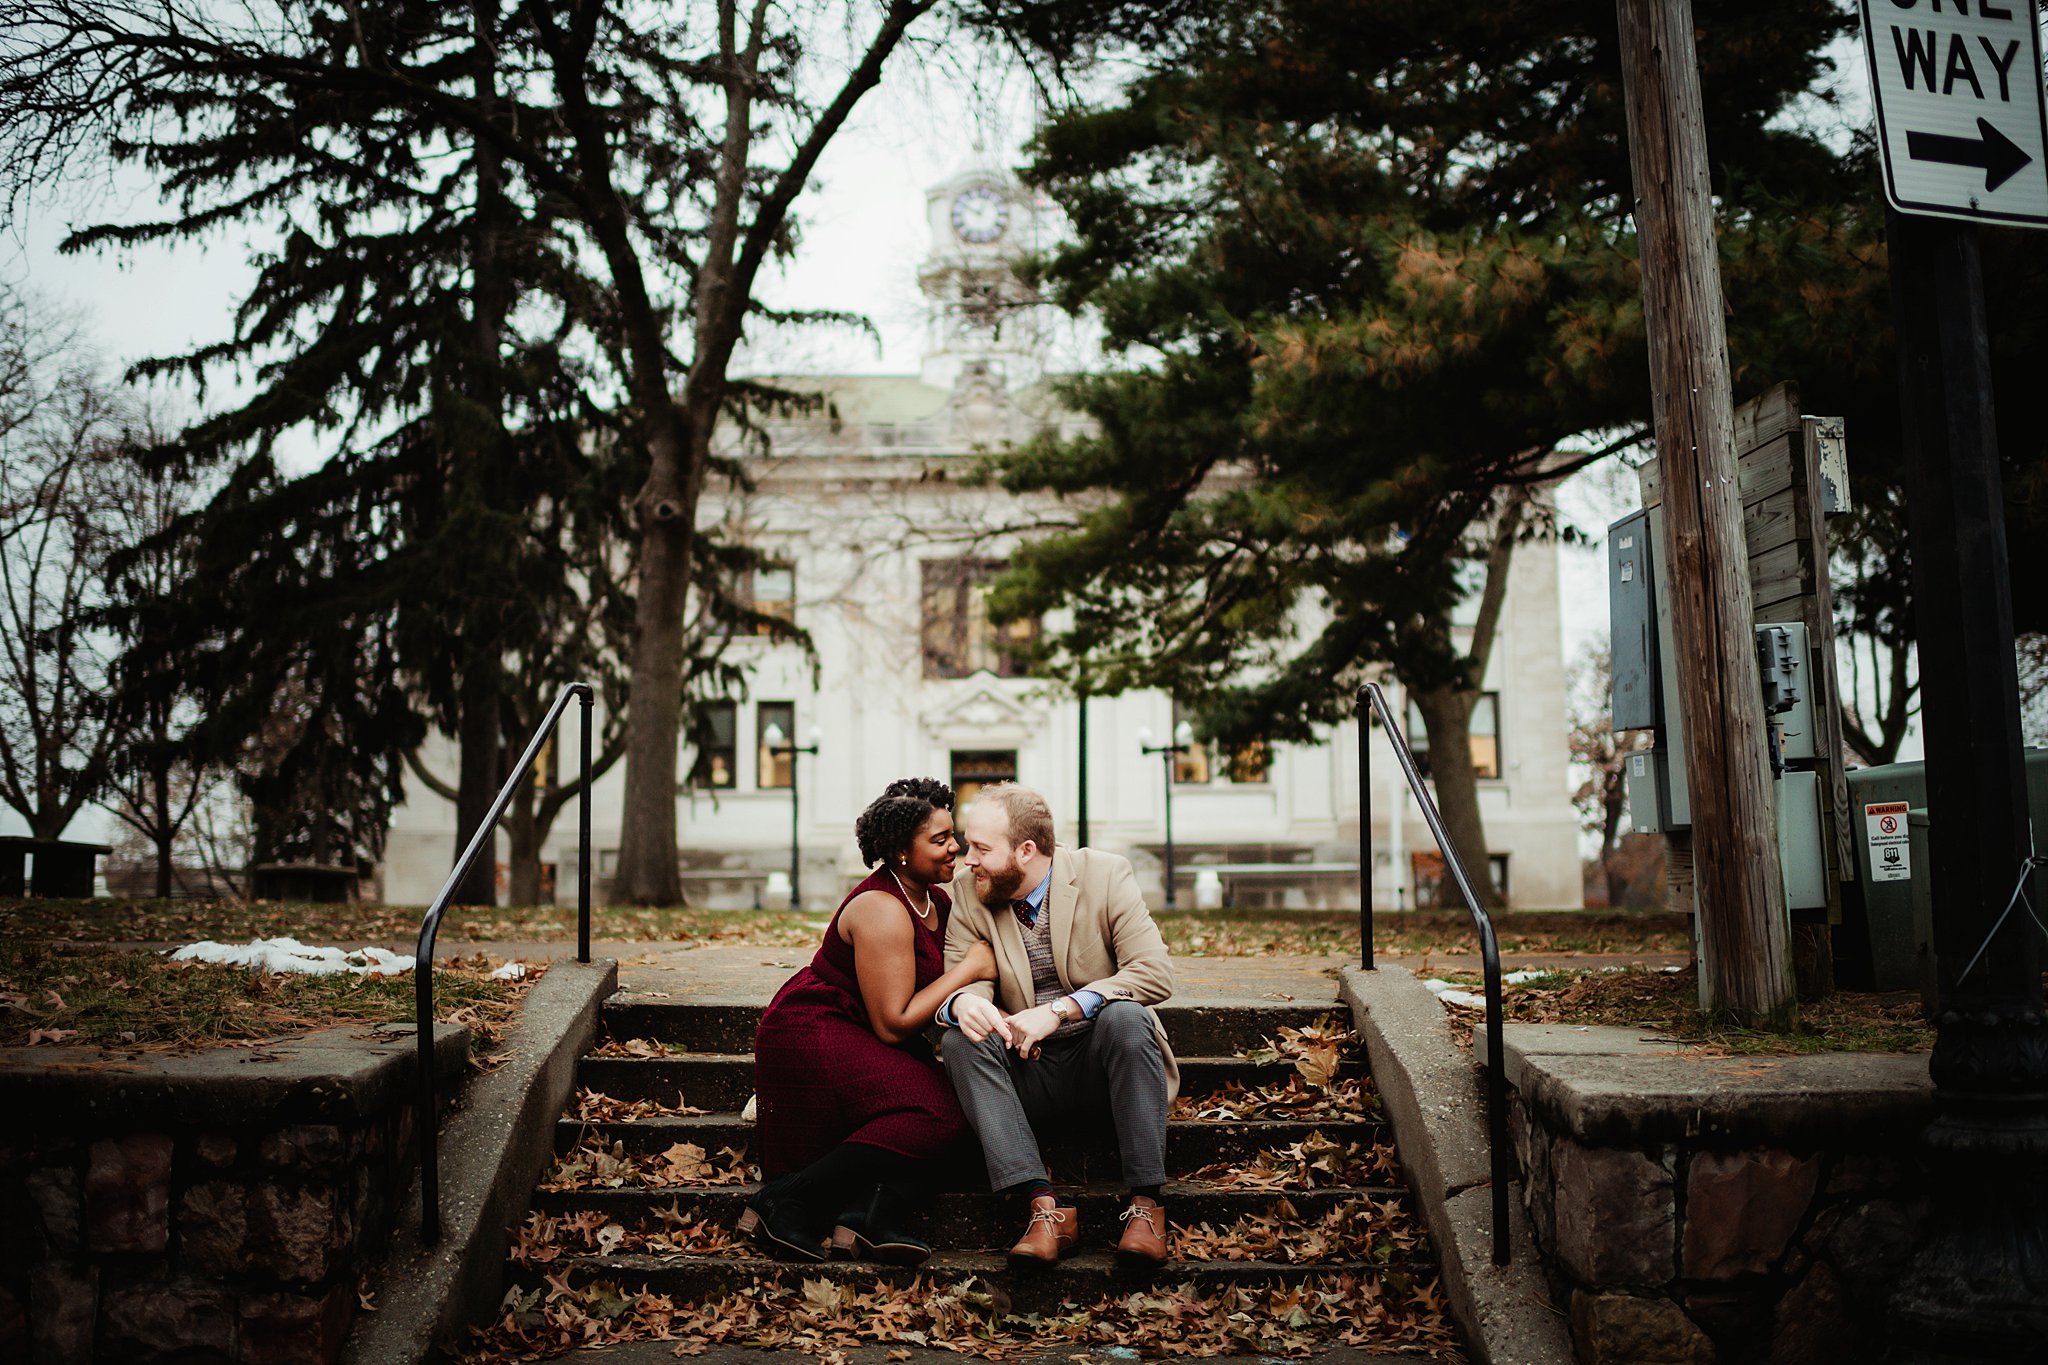 Music, Love, and Historic Charm: A Stunning Engagement Session at the Al. Ringling Theatre in Baraboo, WI